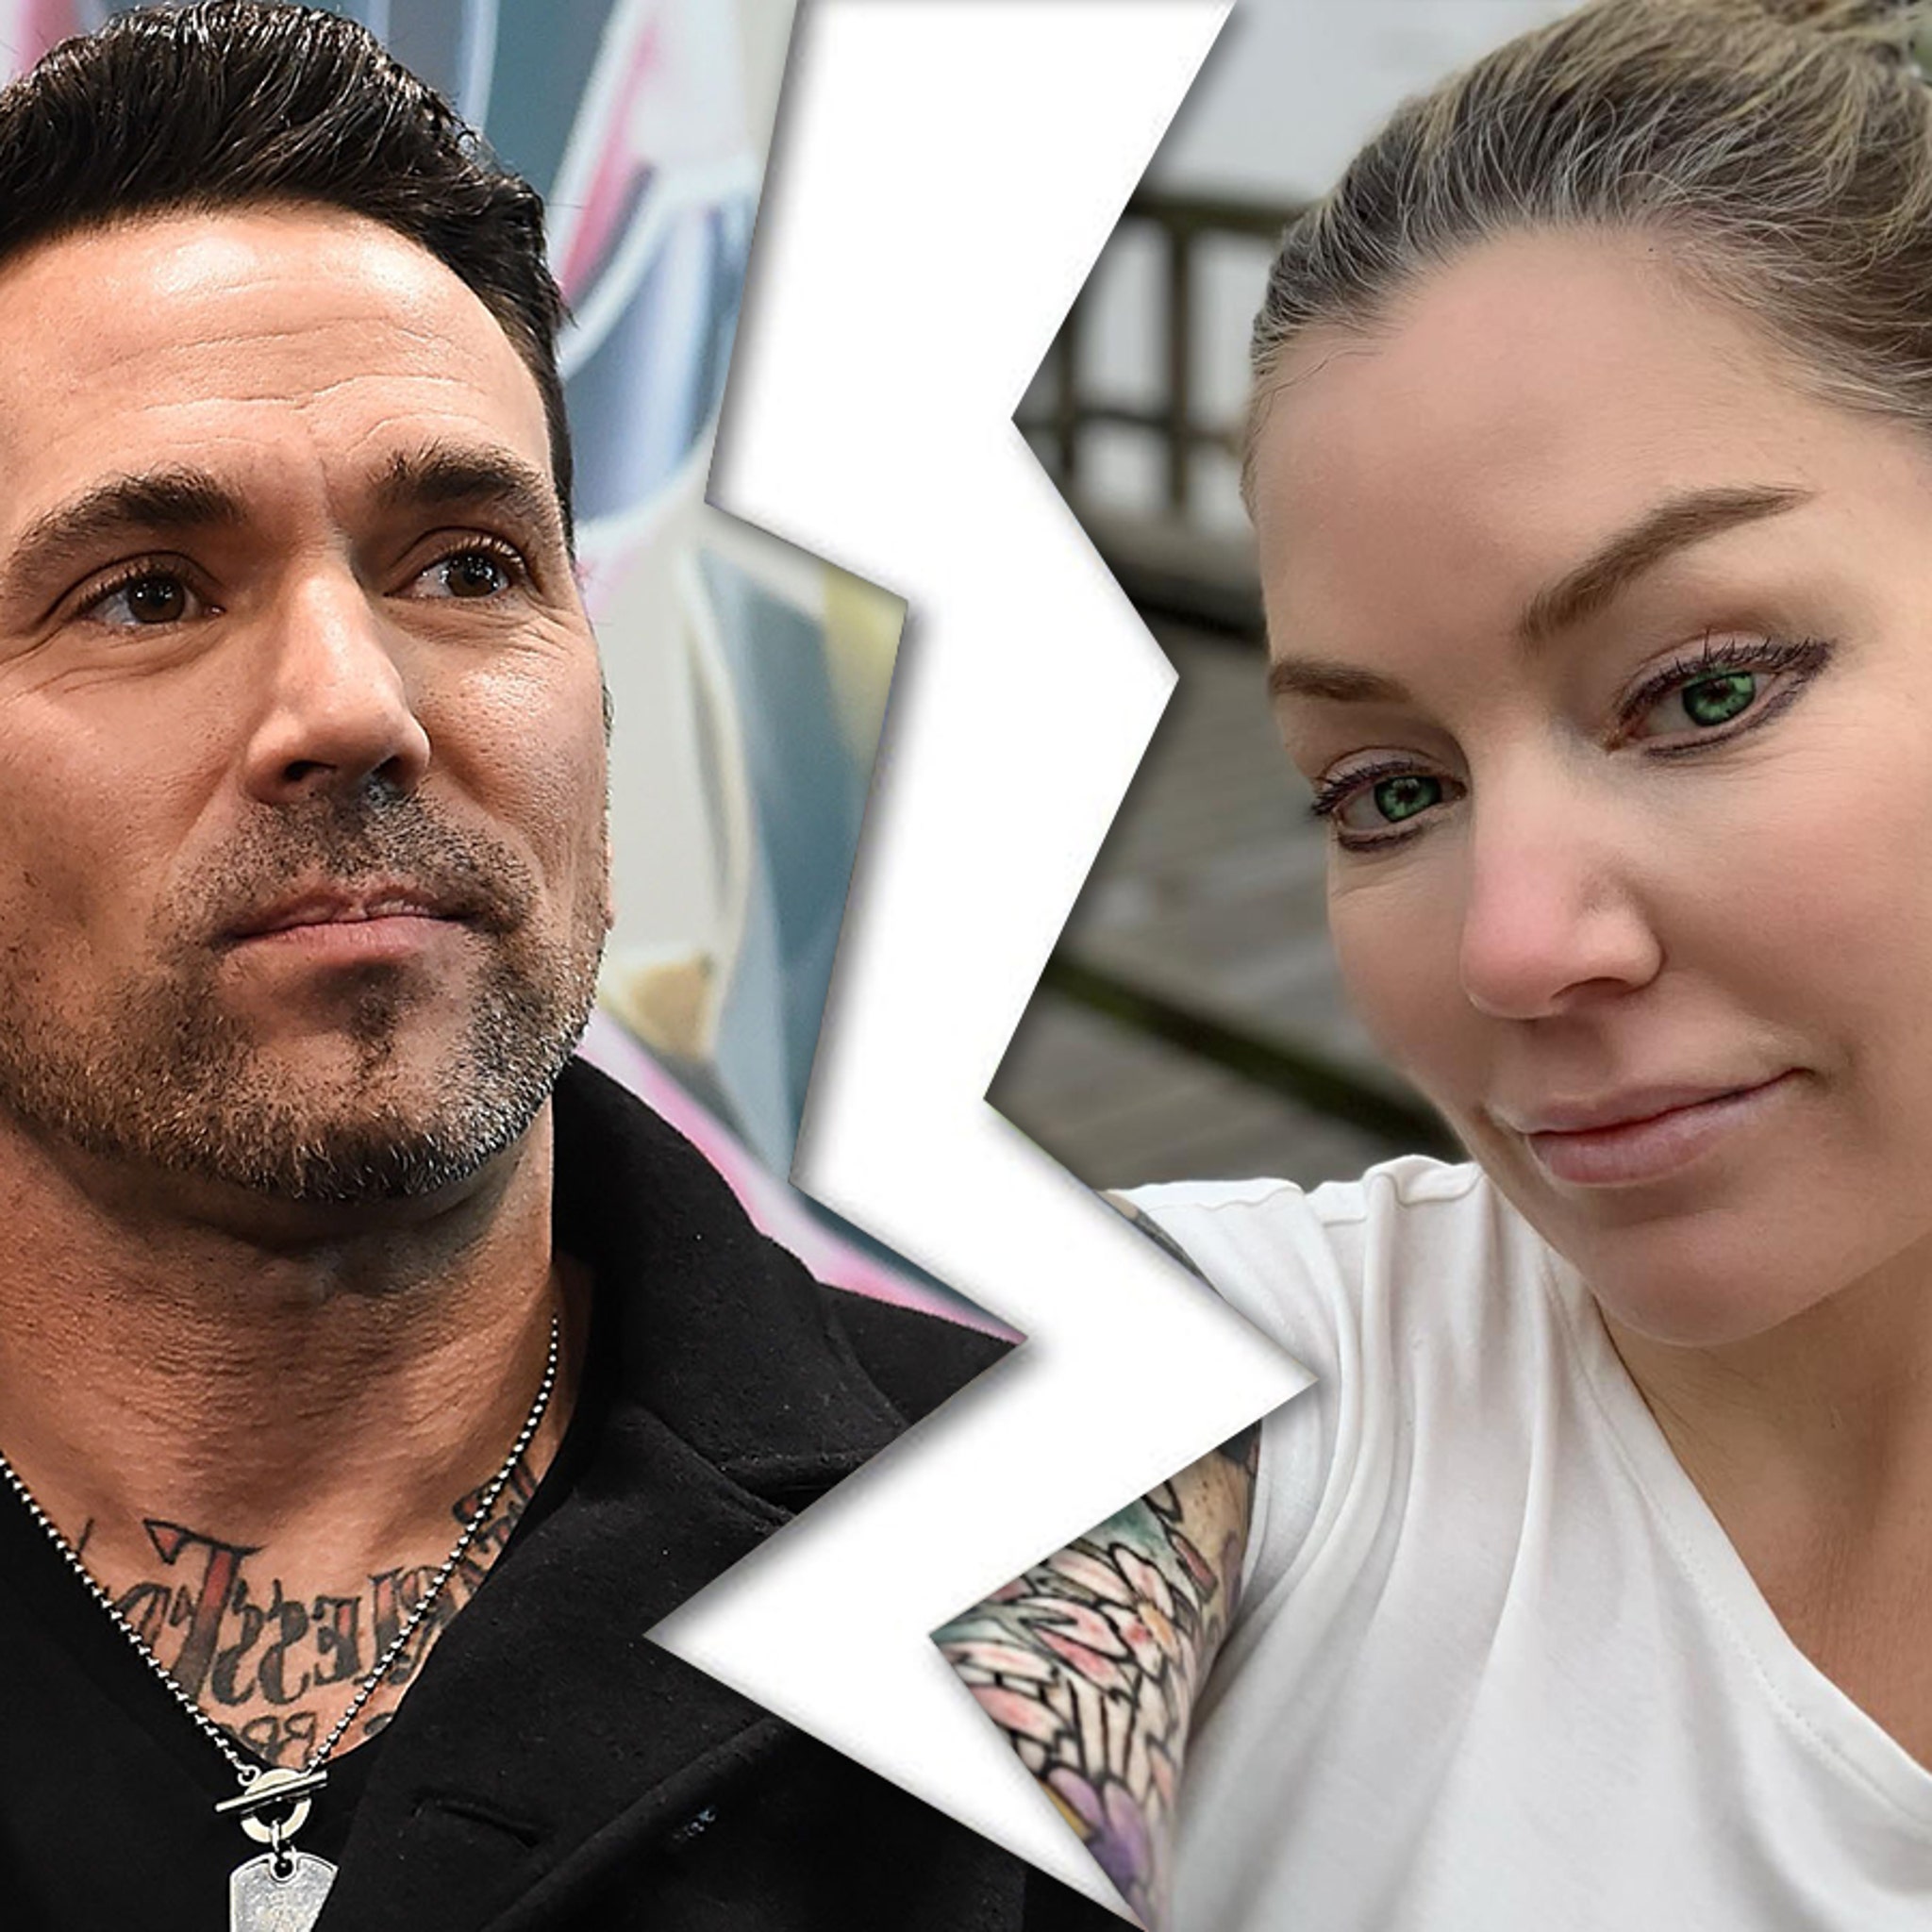 Power Rangers Jason David Franks Getting Divorced, Wife Claims He Cheated